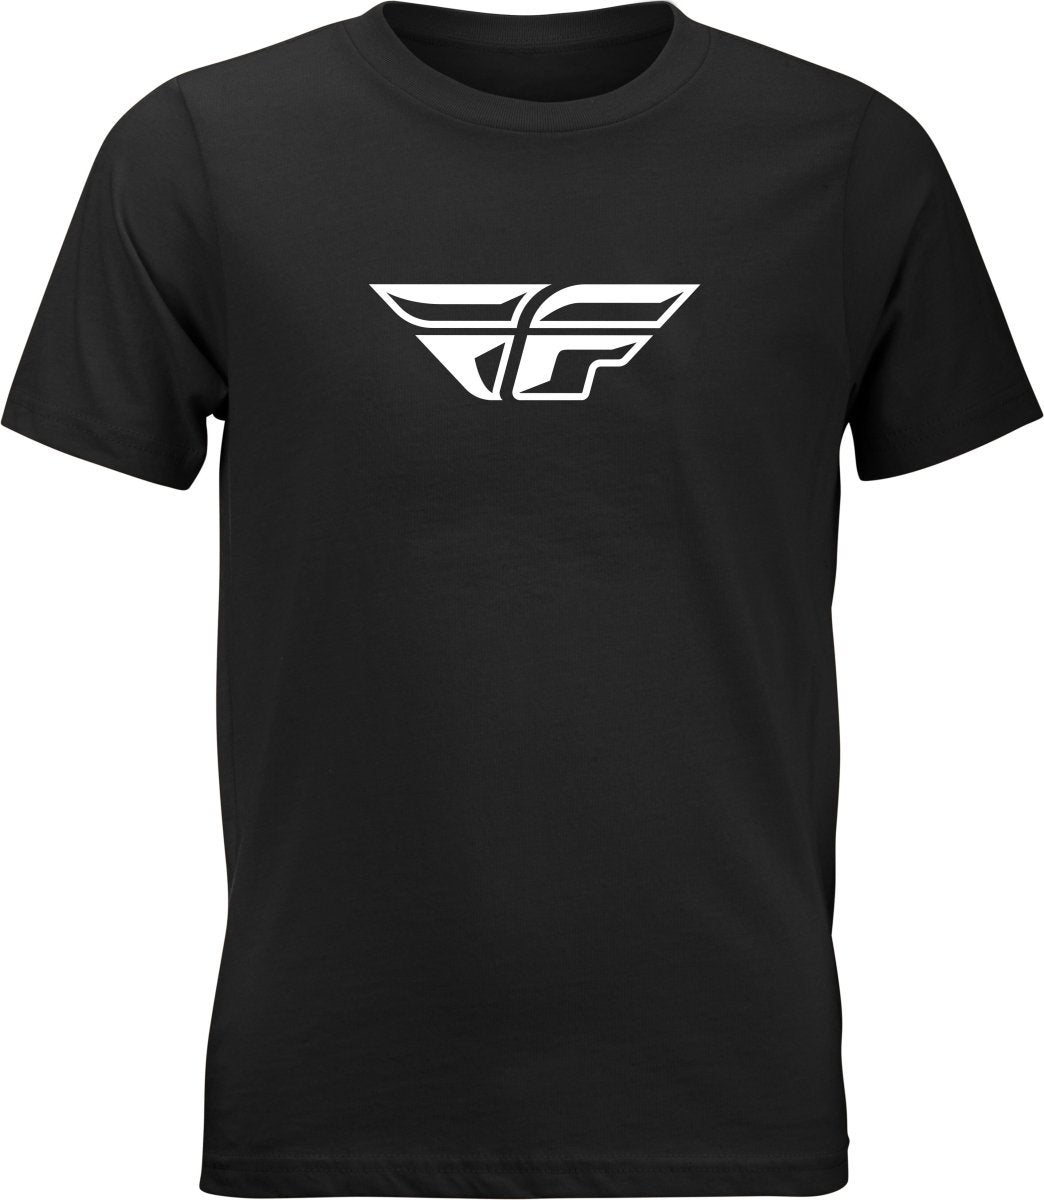 FLY RACING - YOUTH F-WING TEE - 352-0667YS - 191361242441